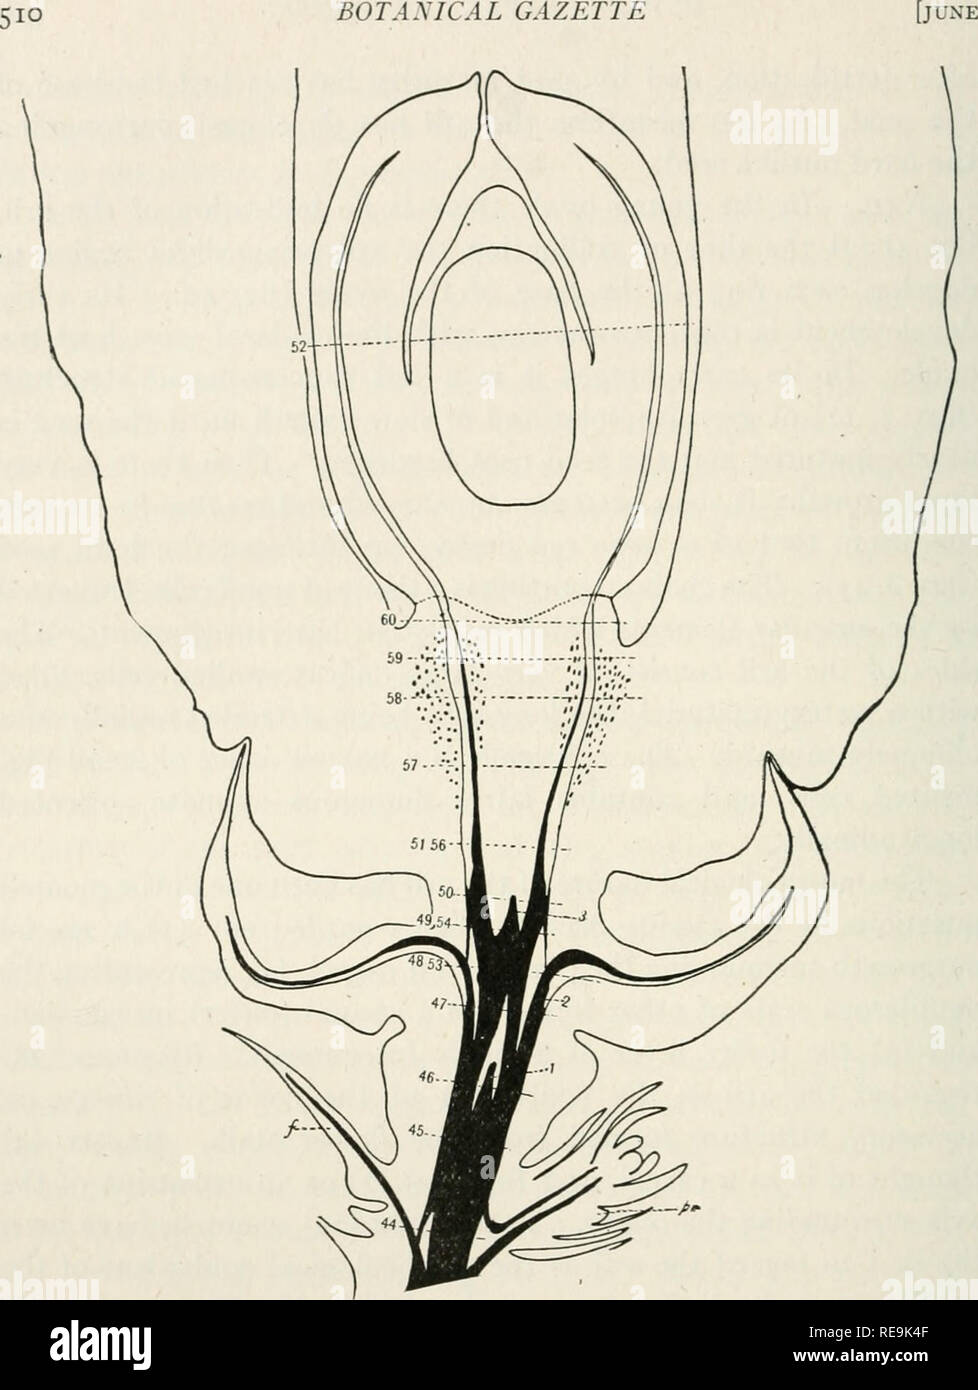 . Contributions from the Hull Botanical Laboratory. Plants. BOTAMCAL GAZETTE. Fig. 43.—Semi-diagrammatic longitudinal section through primary shoot with secondary shoot and portion of mature ovule, X17; outlines of primary and secondary shoots and aril of ovule made with camera lucida, ovule inserted diagrammatically; outlines of vascular supply also made with camera; note young ovule of next season above primary axis tip (pr); 1,2,3, traces to 1st, 2d, and 3d pairs of scales, second pair of which shown in section; /, fertile scale of primary shoot; whole vascular cylinder of secondary shoot s Stock Photo